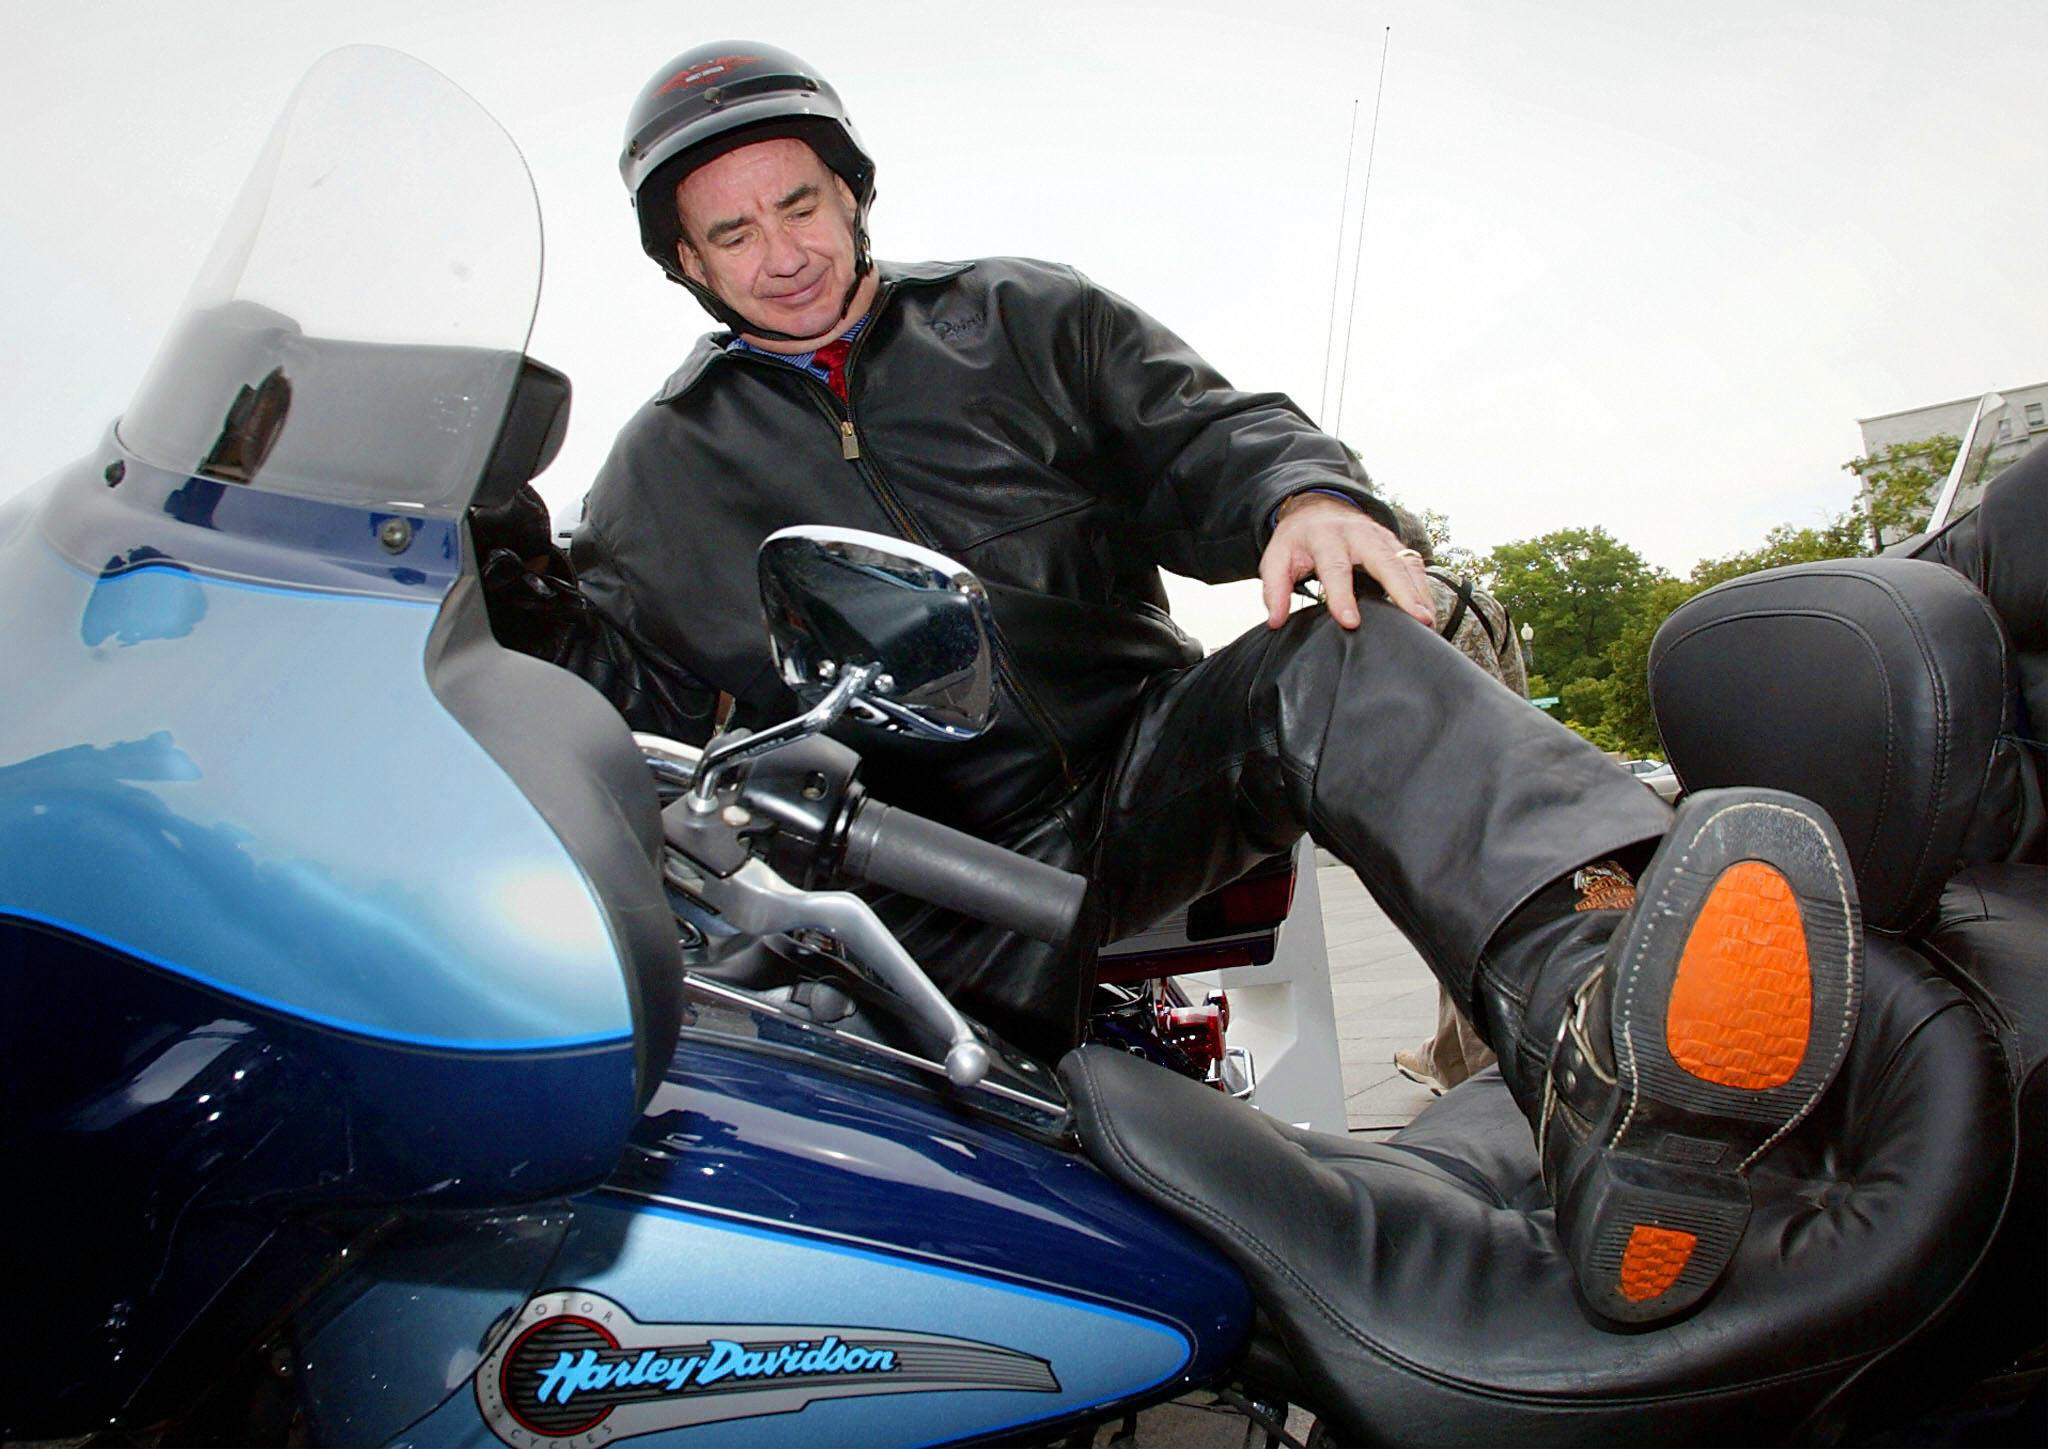 Health and Human Services (HHS) Secretary Tommy Thompson gets on a Harley Davidson motorcycle clad in his leather pants for a ride outside HHS headquarters 16 June 2003 in Washington, DC.